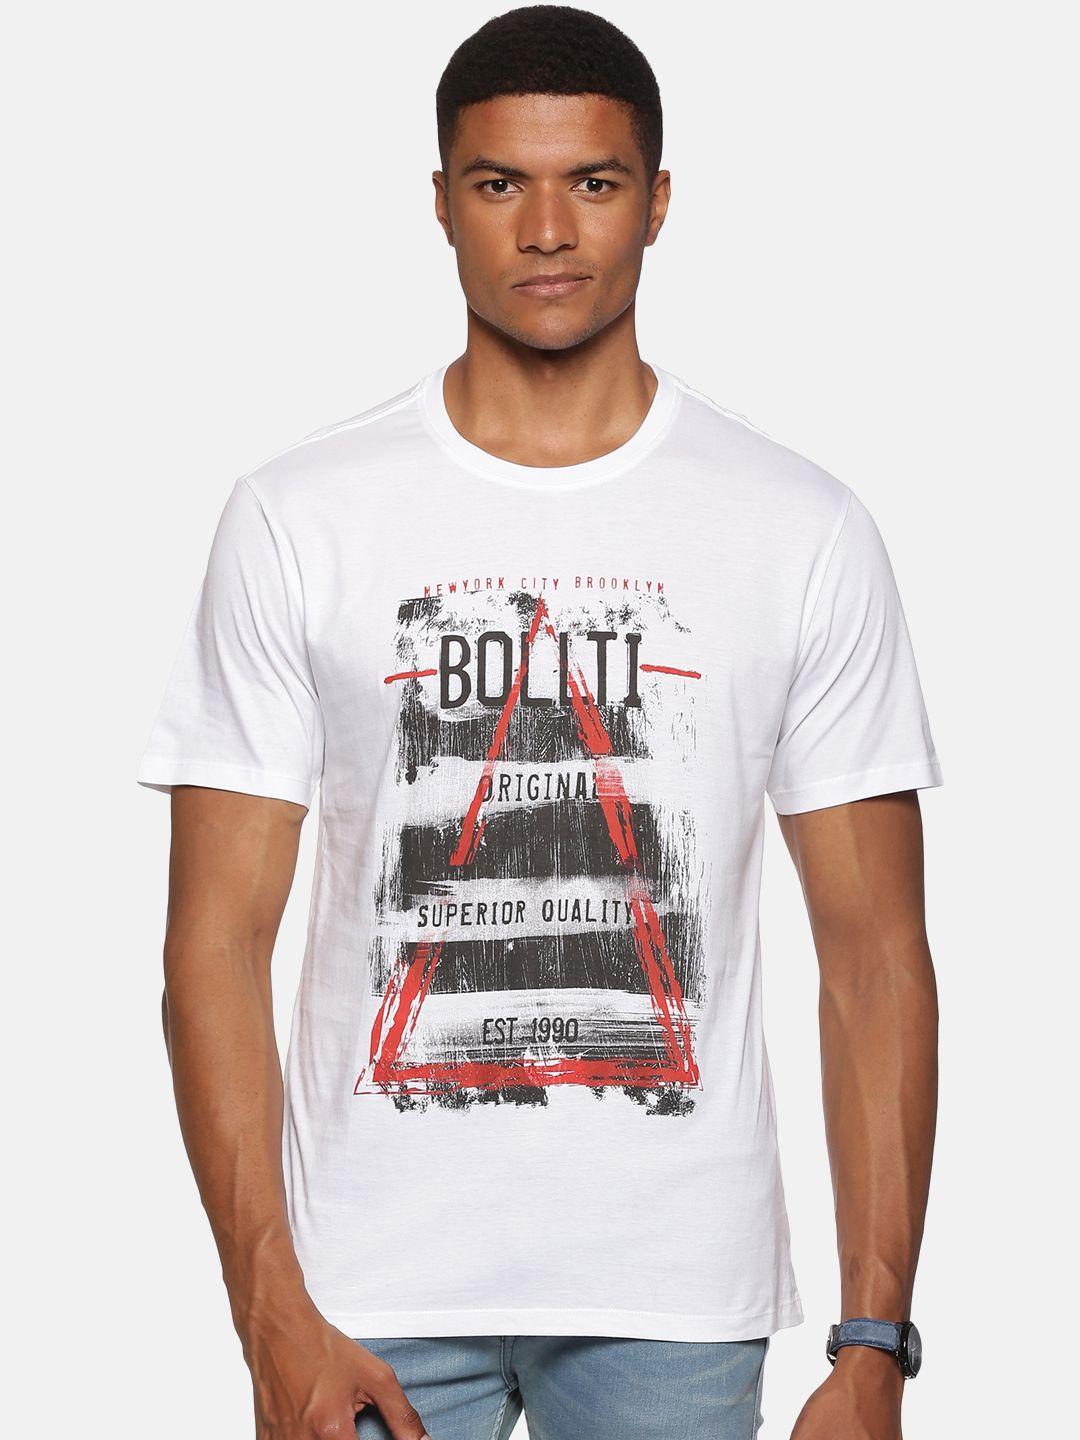 bollti typography printed pure cotton casual t-shirt